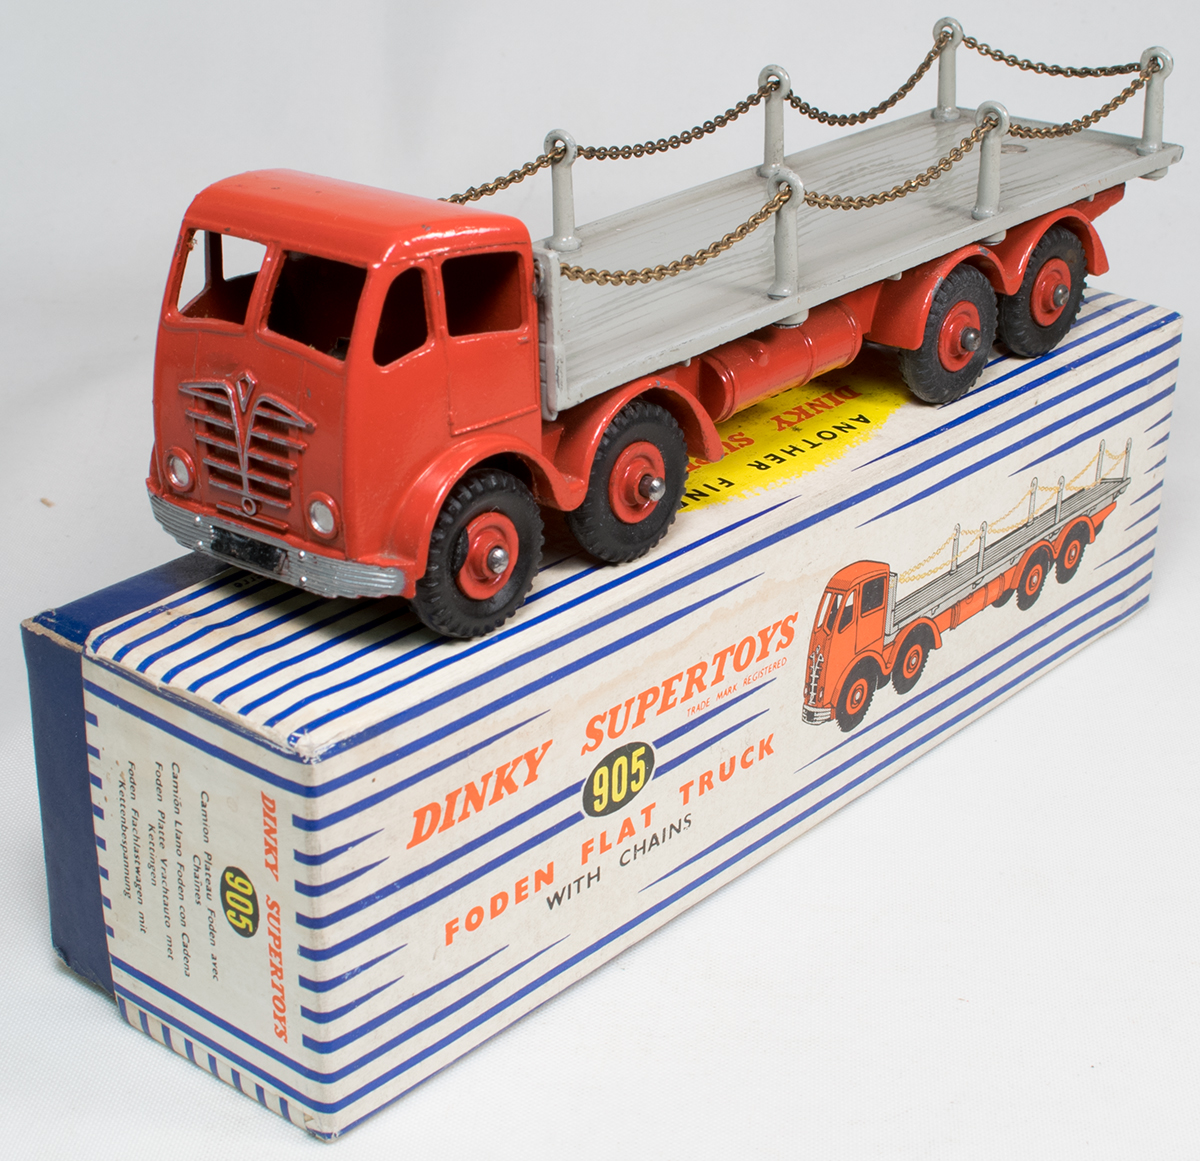 dinky foden flat truck with chains